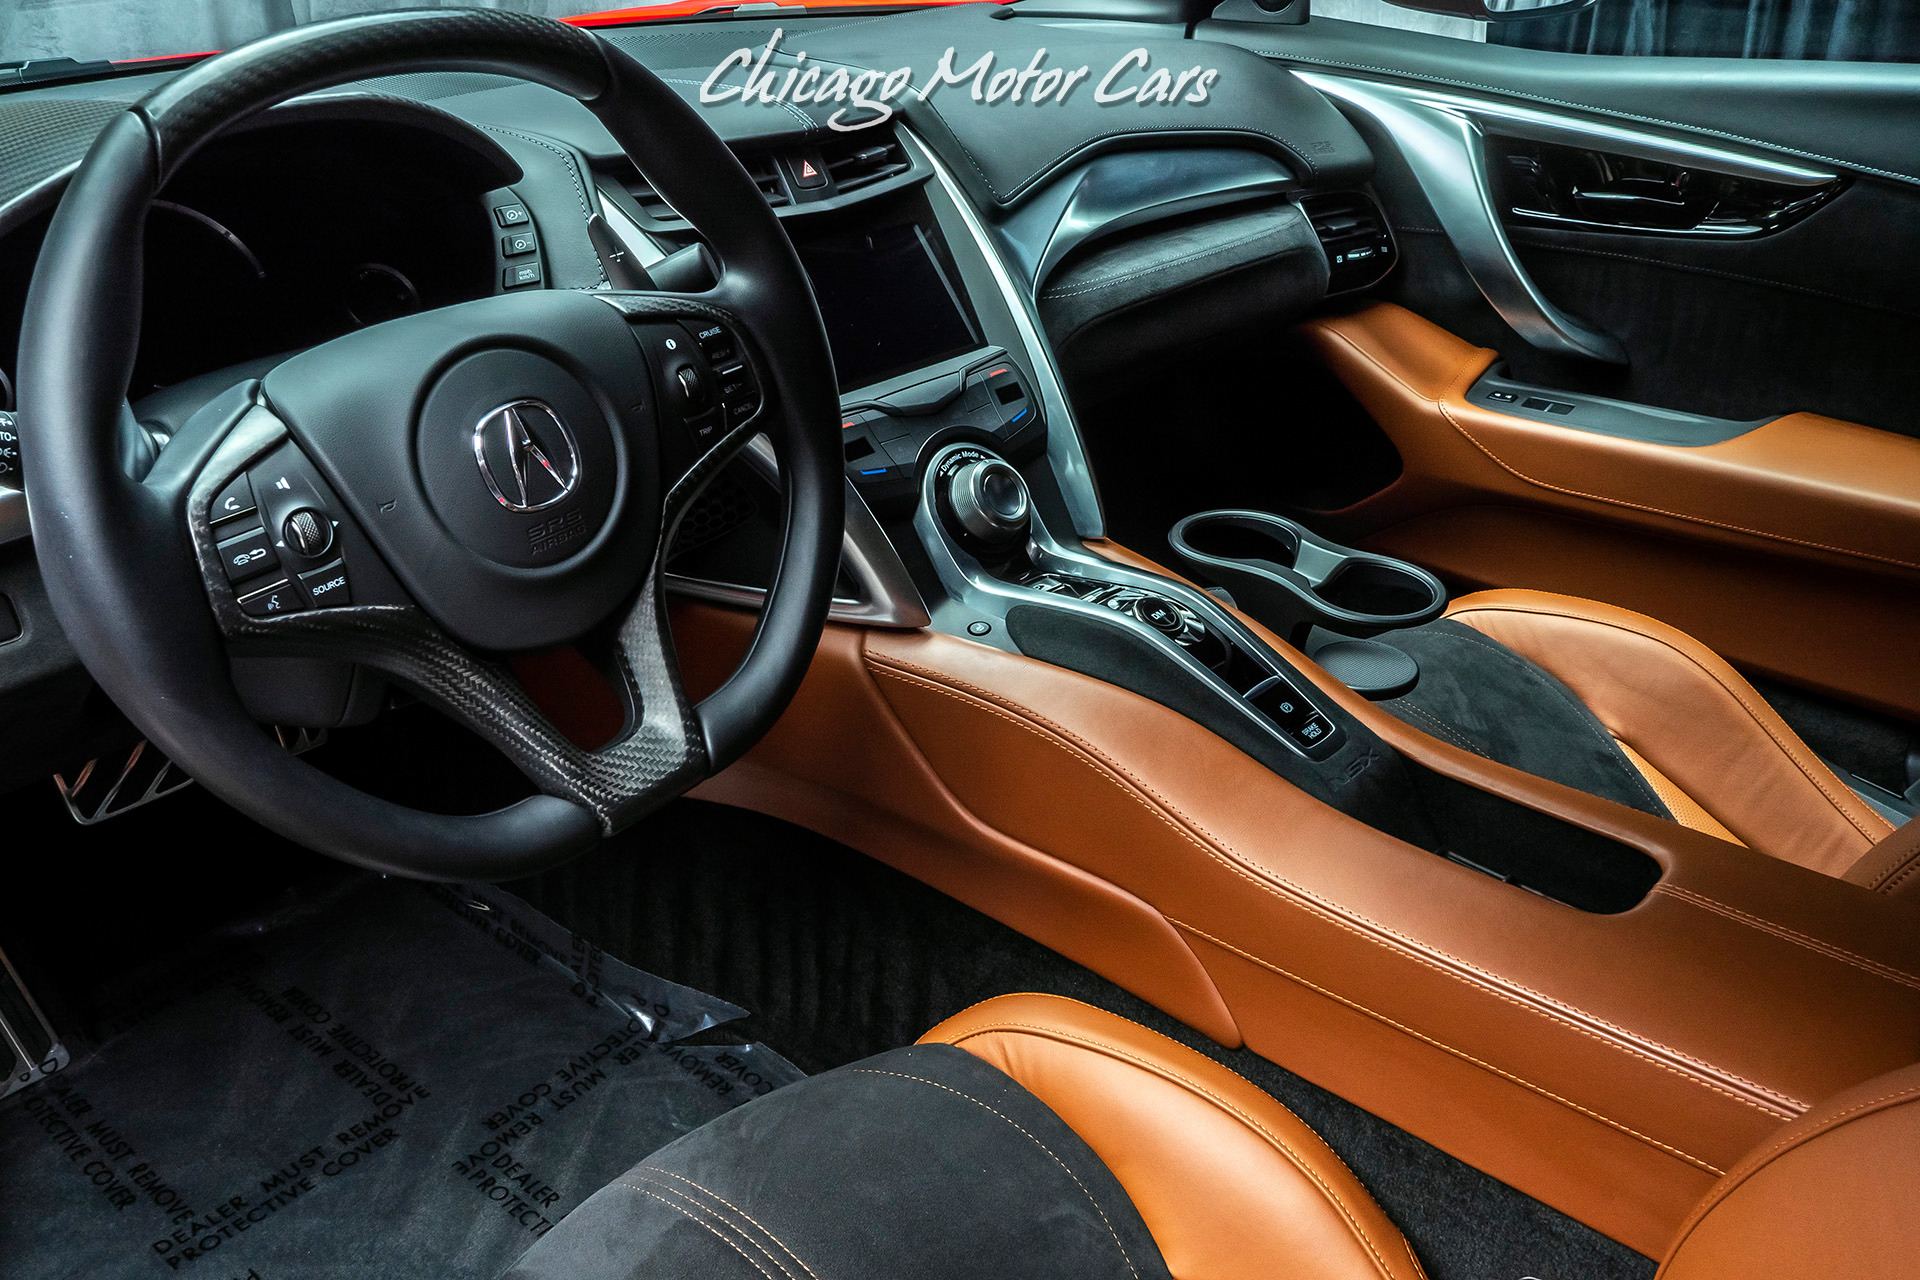 Used-2017-Acura-NSX-Coupe-MSRP-200500-ONLY-6K-MILES